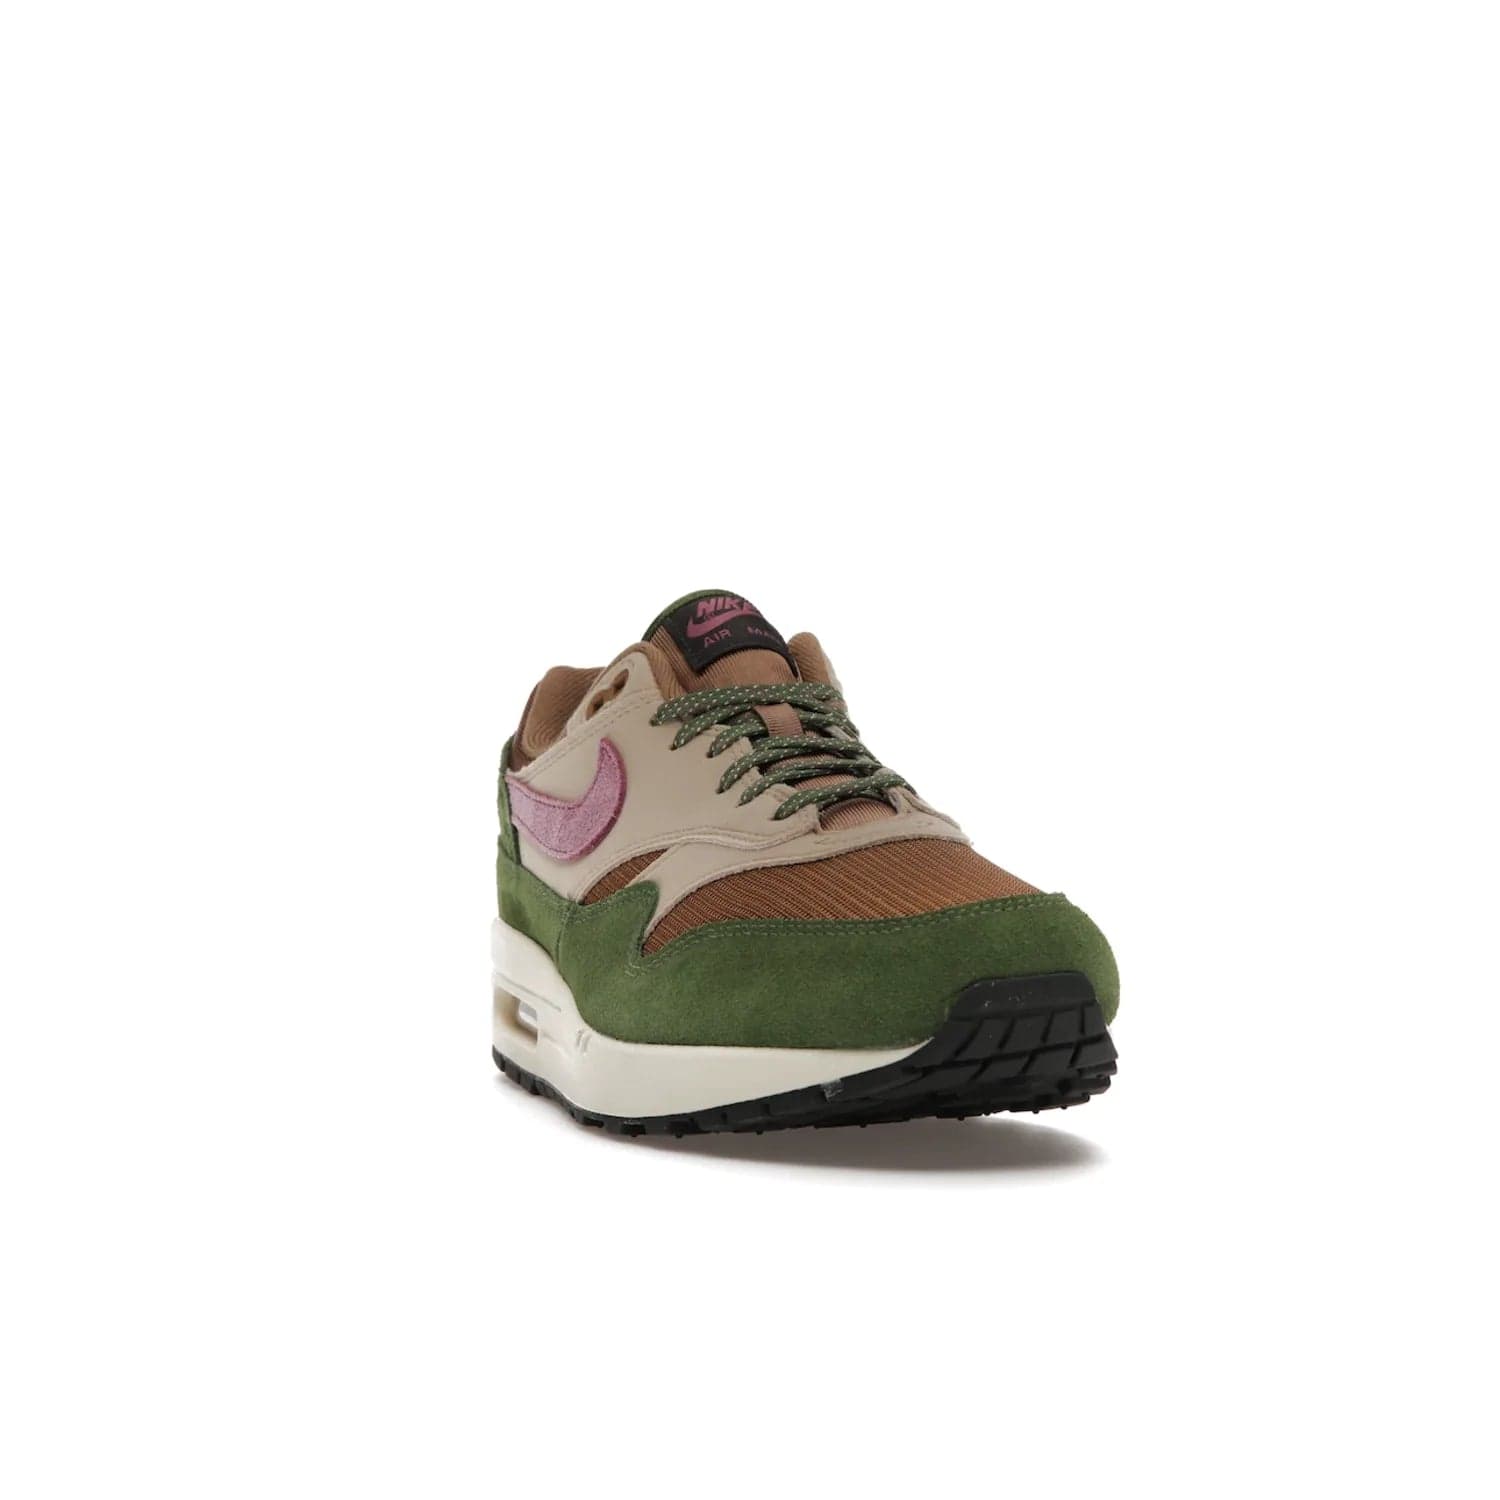 Nike Air Max 1 SH Treeline - Image 8 - Only at www.BallersClubKickz.com - A classic Nike Air Max 1 SH Treeline with a brown mesh upper, taupe Durabuck overlays, and hairy green suede details. Light Bordeaux Swoosh and woven tongue label for a pop of color. Released in May 2022. Perfect for any outfit and sure to impress.